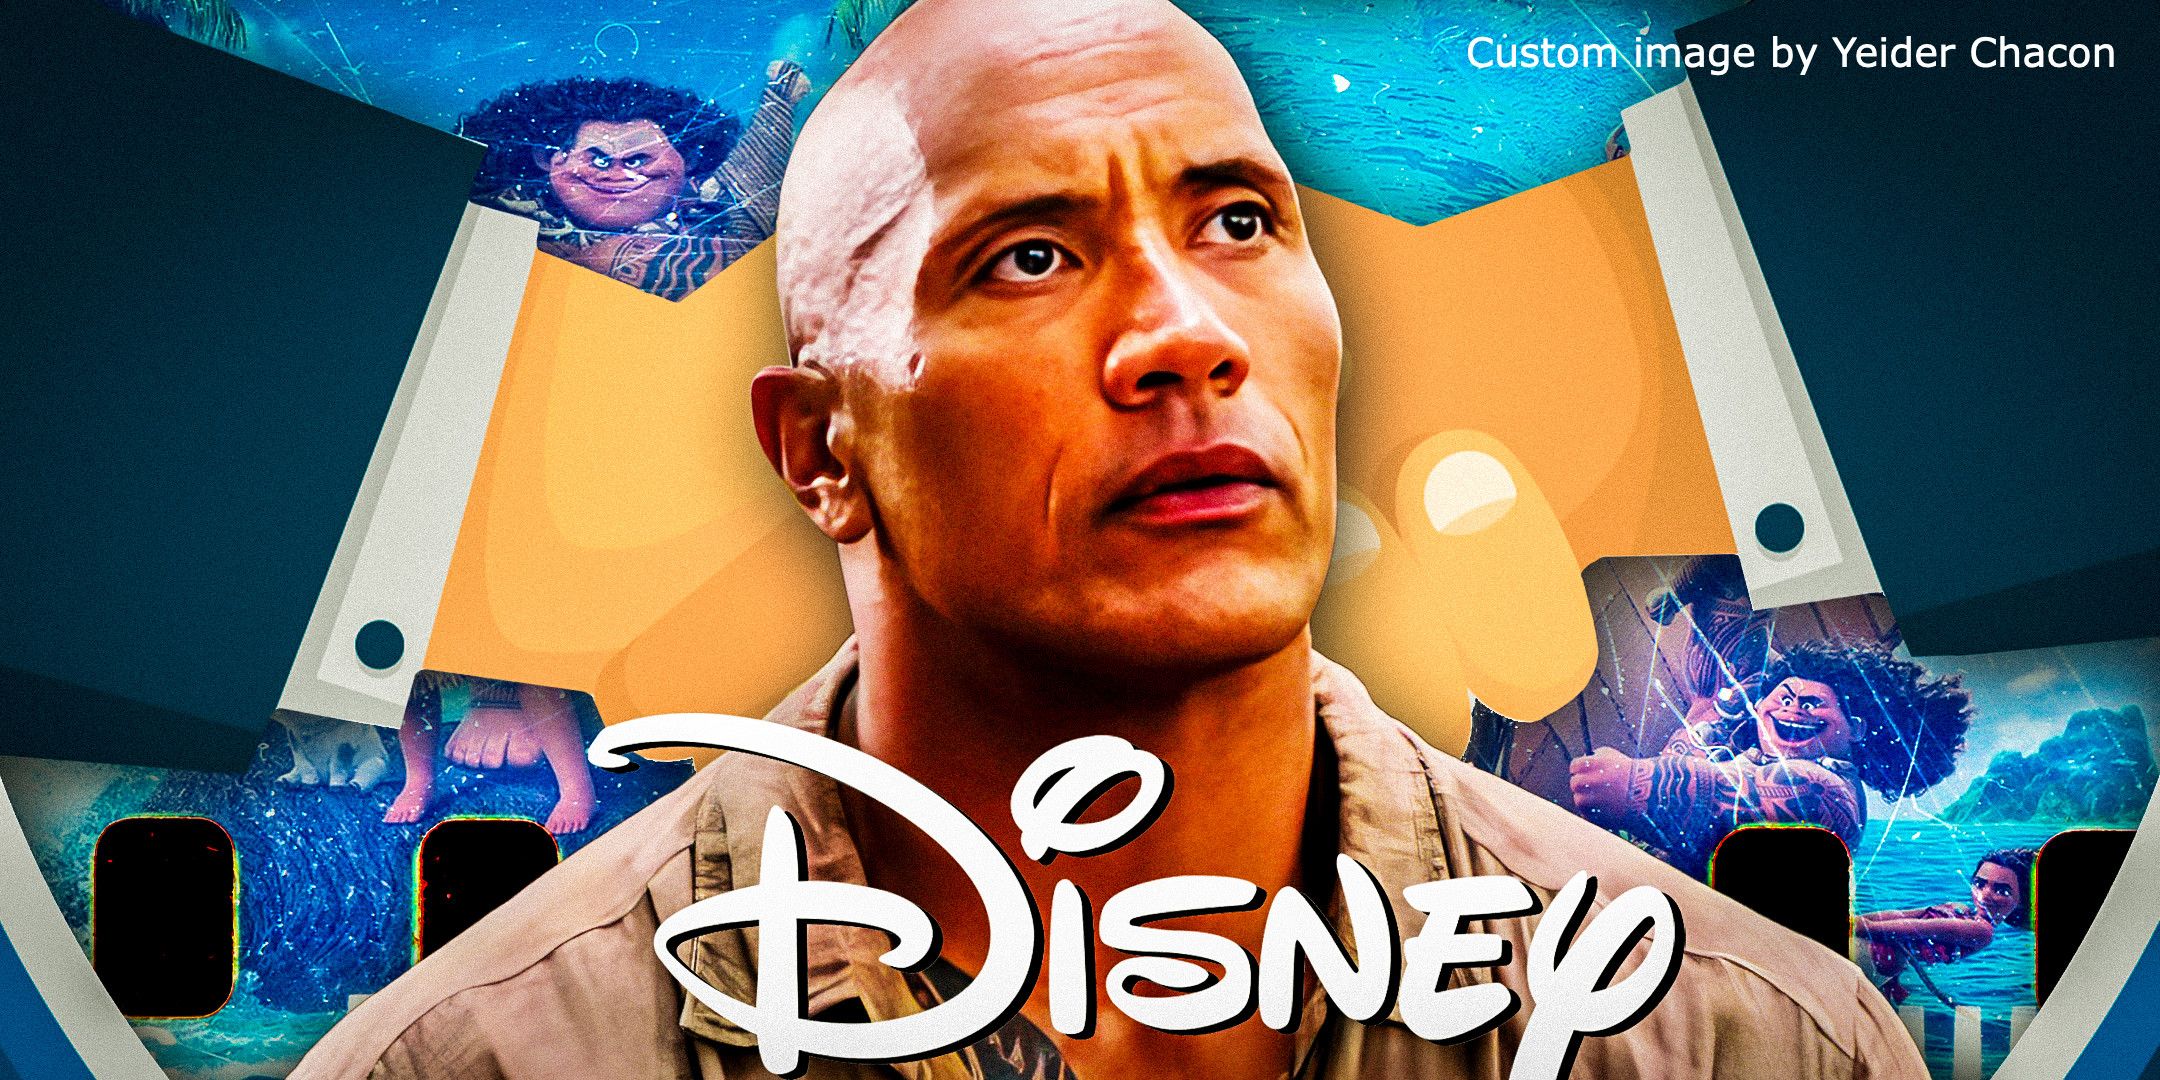 An SR custom image of Dwayne Johnson as Spencer in Jungle Cruise surrounding by images from Moana, a pair of shaking hands, and the Disney logo 